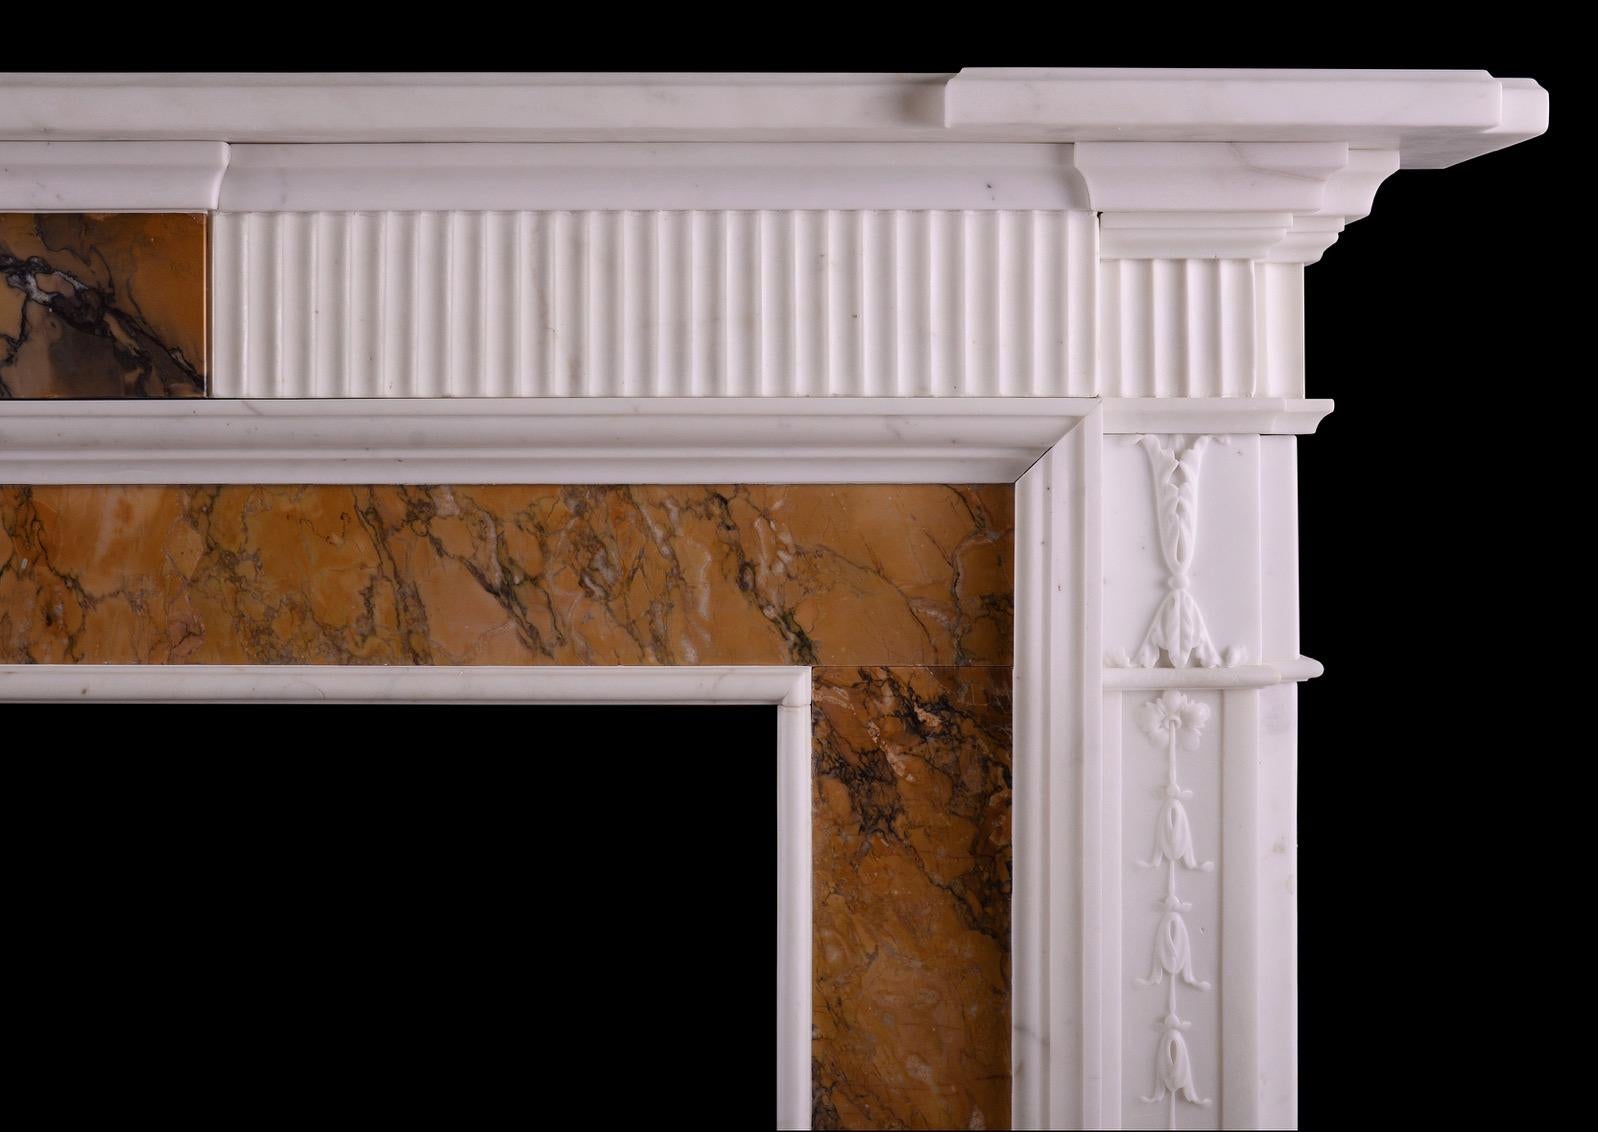 An English Georgian Statuary marble fireplace with Italian Siena inlay. The jambs with carved bell drops and foliage, with Siena inlay to ingrounds. The reeded frieze with Siena centre block, surmounted by moulded shelf. English, late 18th